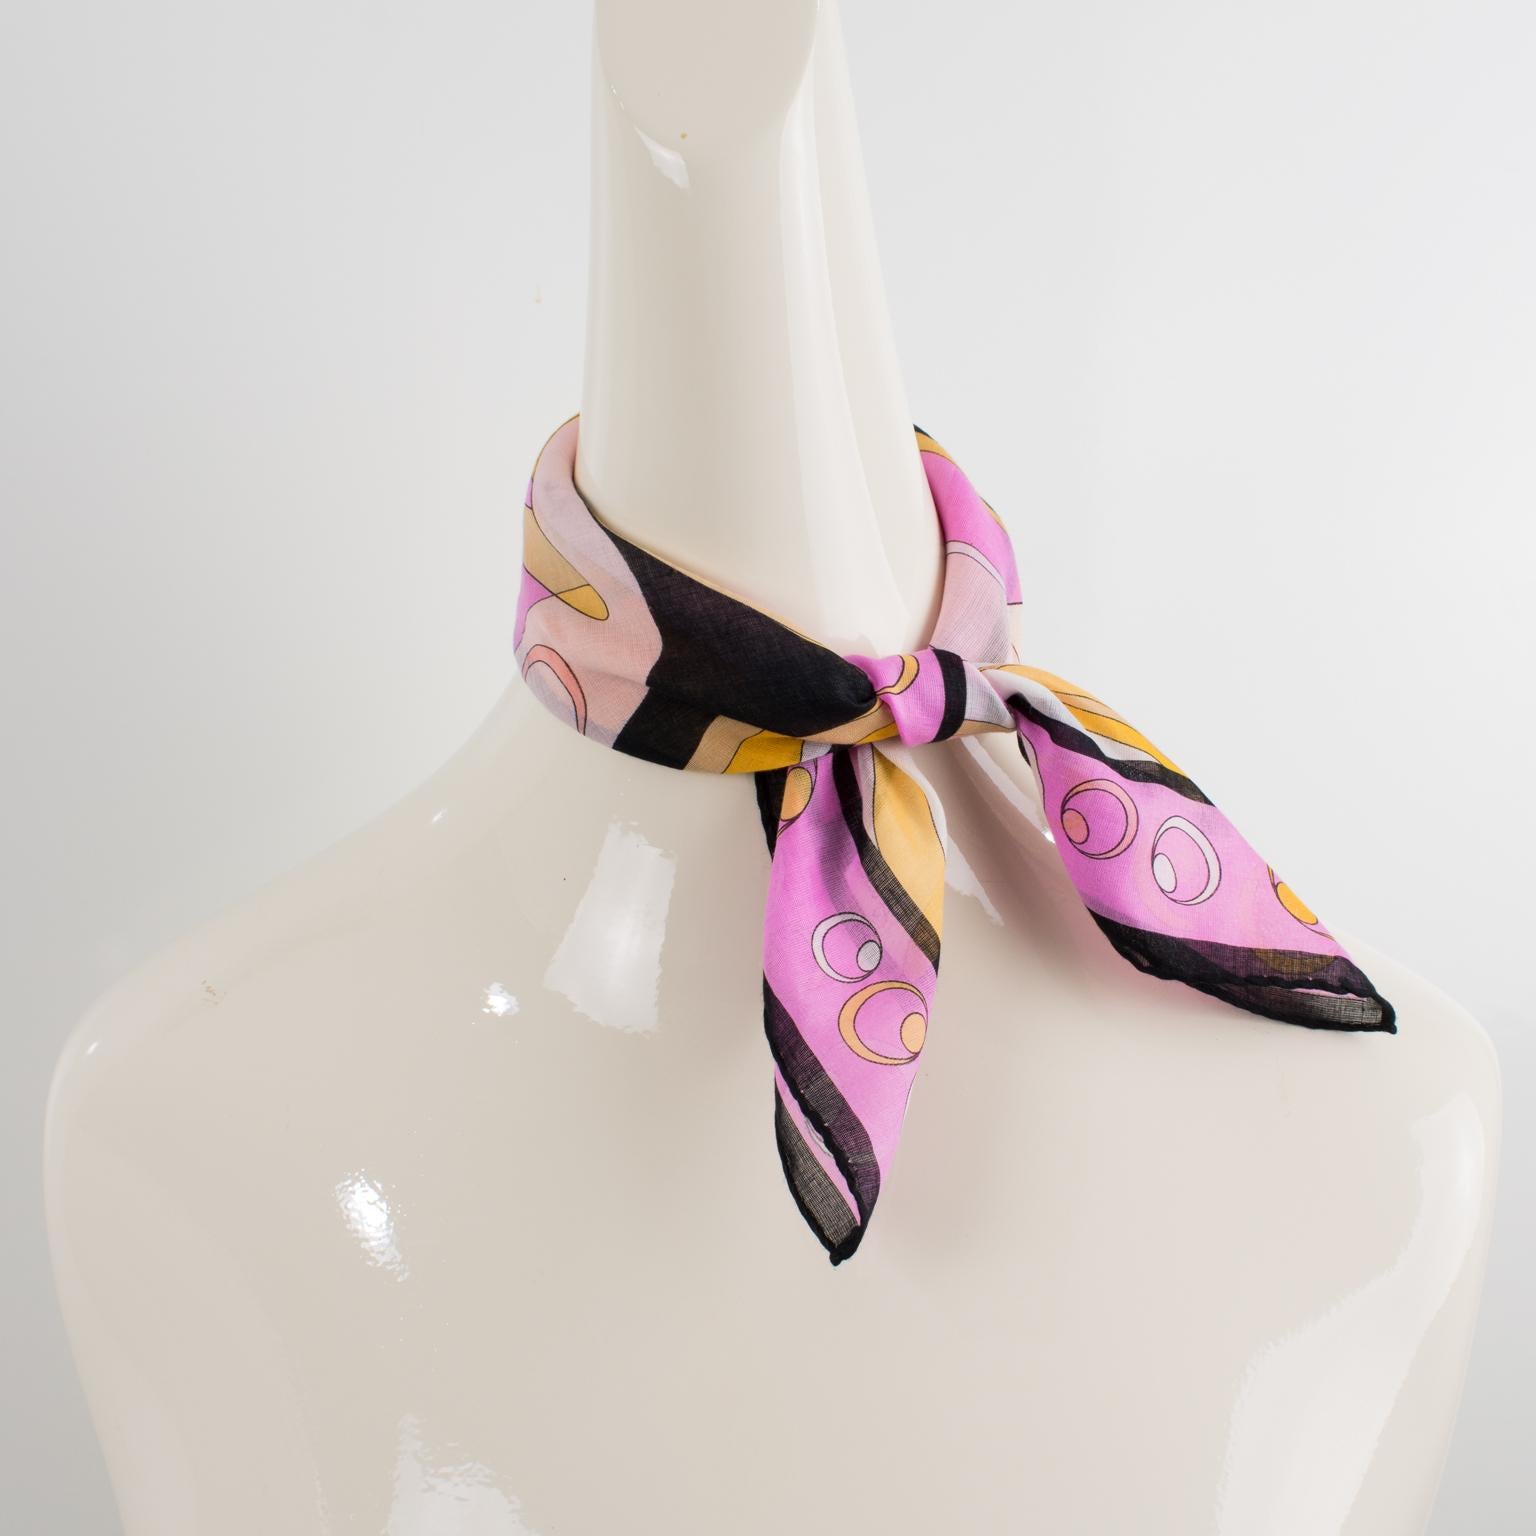 Beautiful cotton scarf by Emilio Pucci in pink and orange colors featuring an abstract design print with a glass of champagne and bubbles and marked several times in the design 